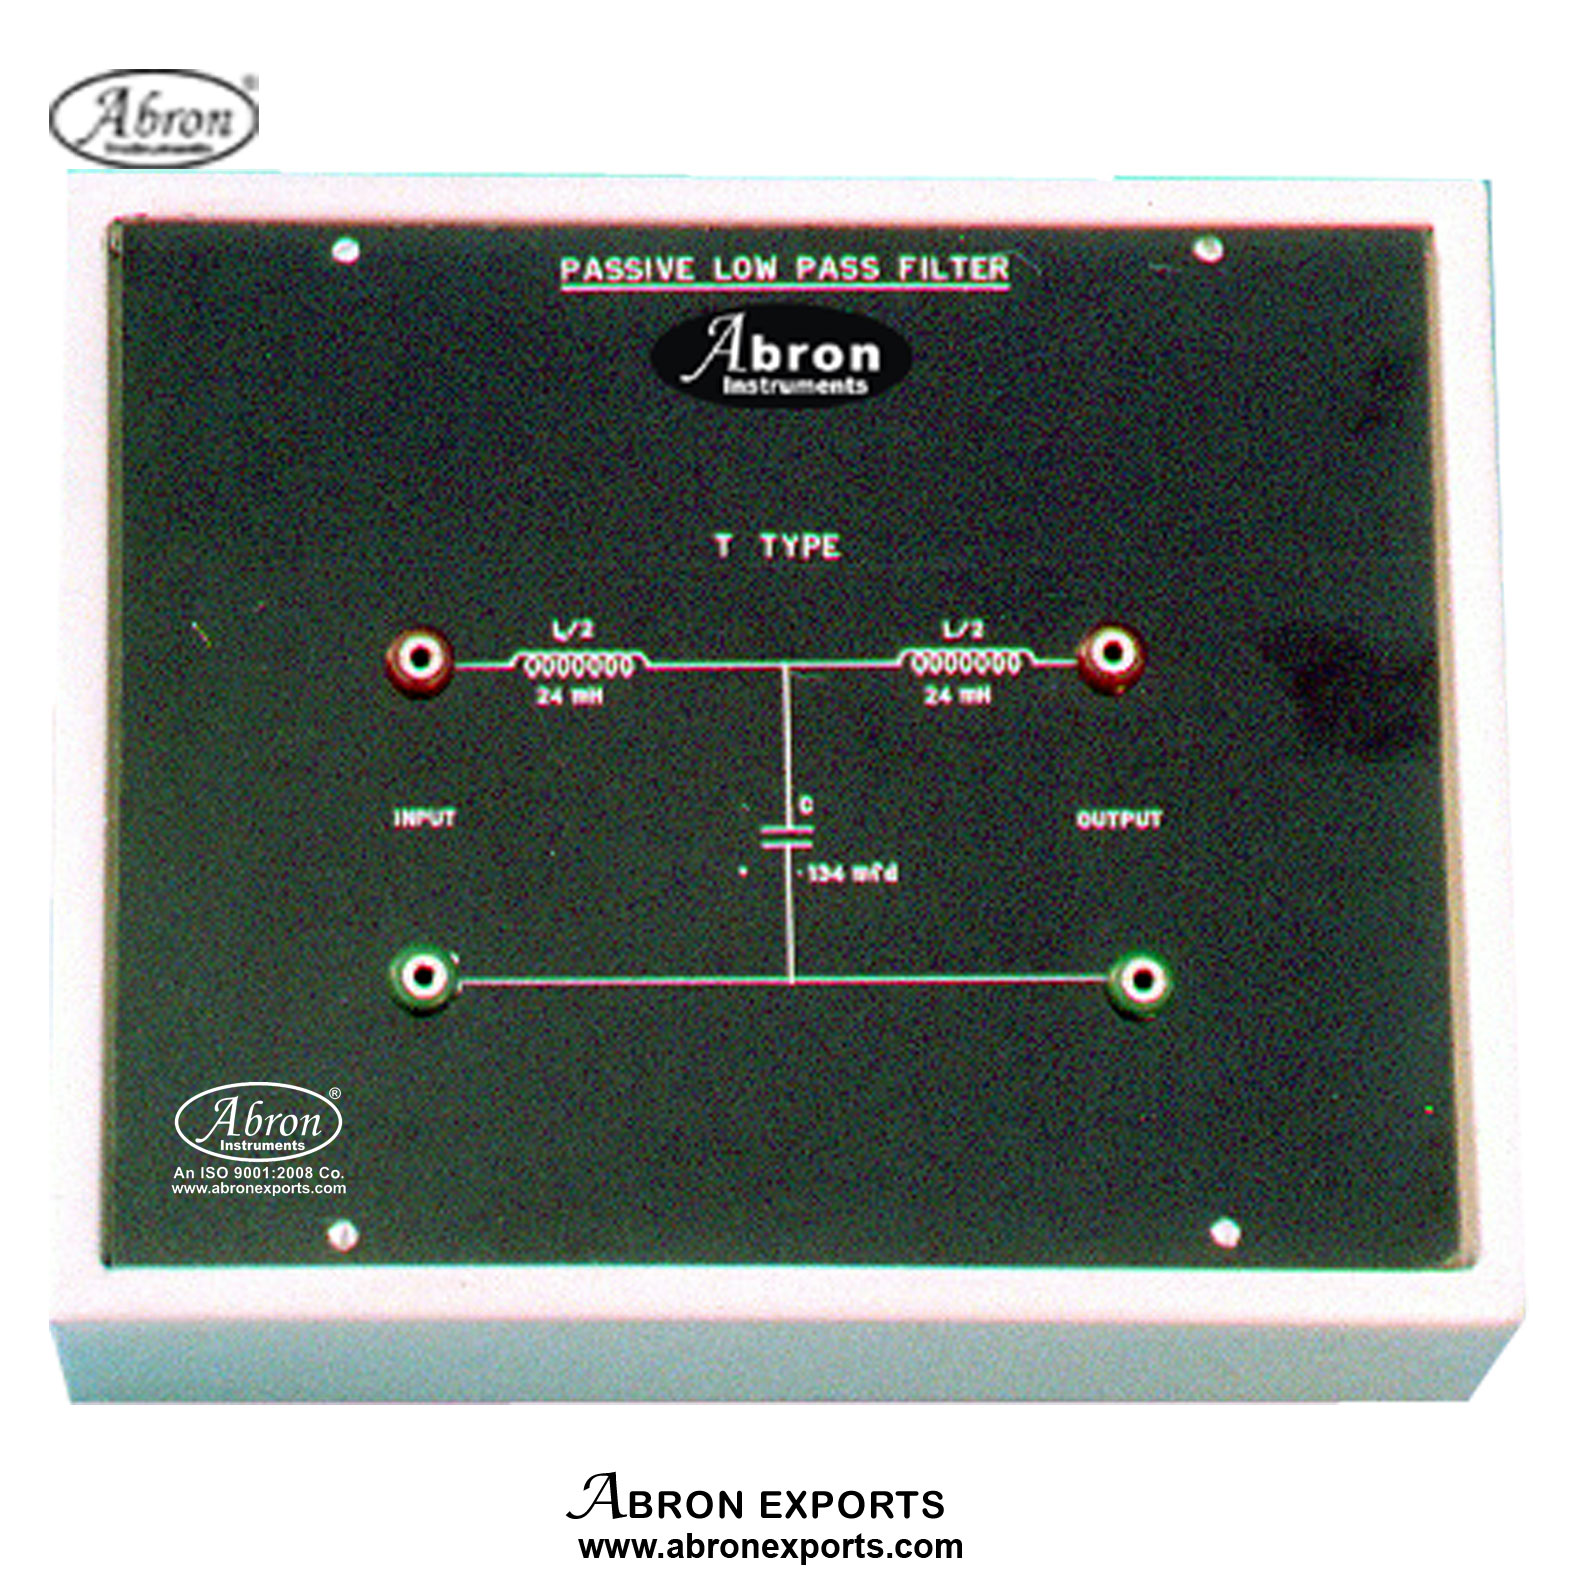 Passive filters low pass filter T Type capacitor  Input output sockets in box AE-1356TL